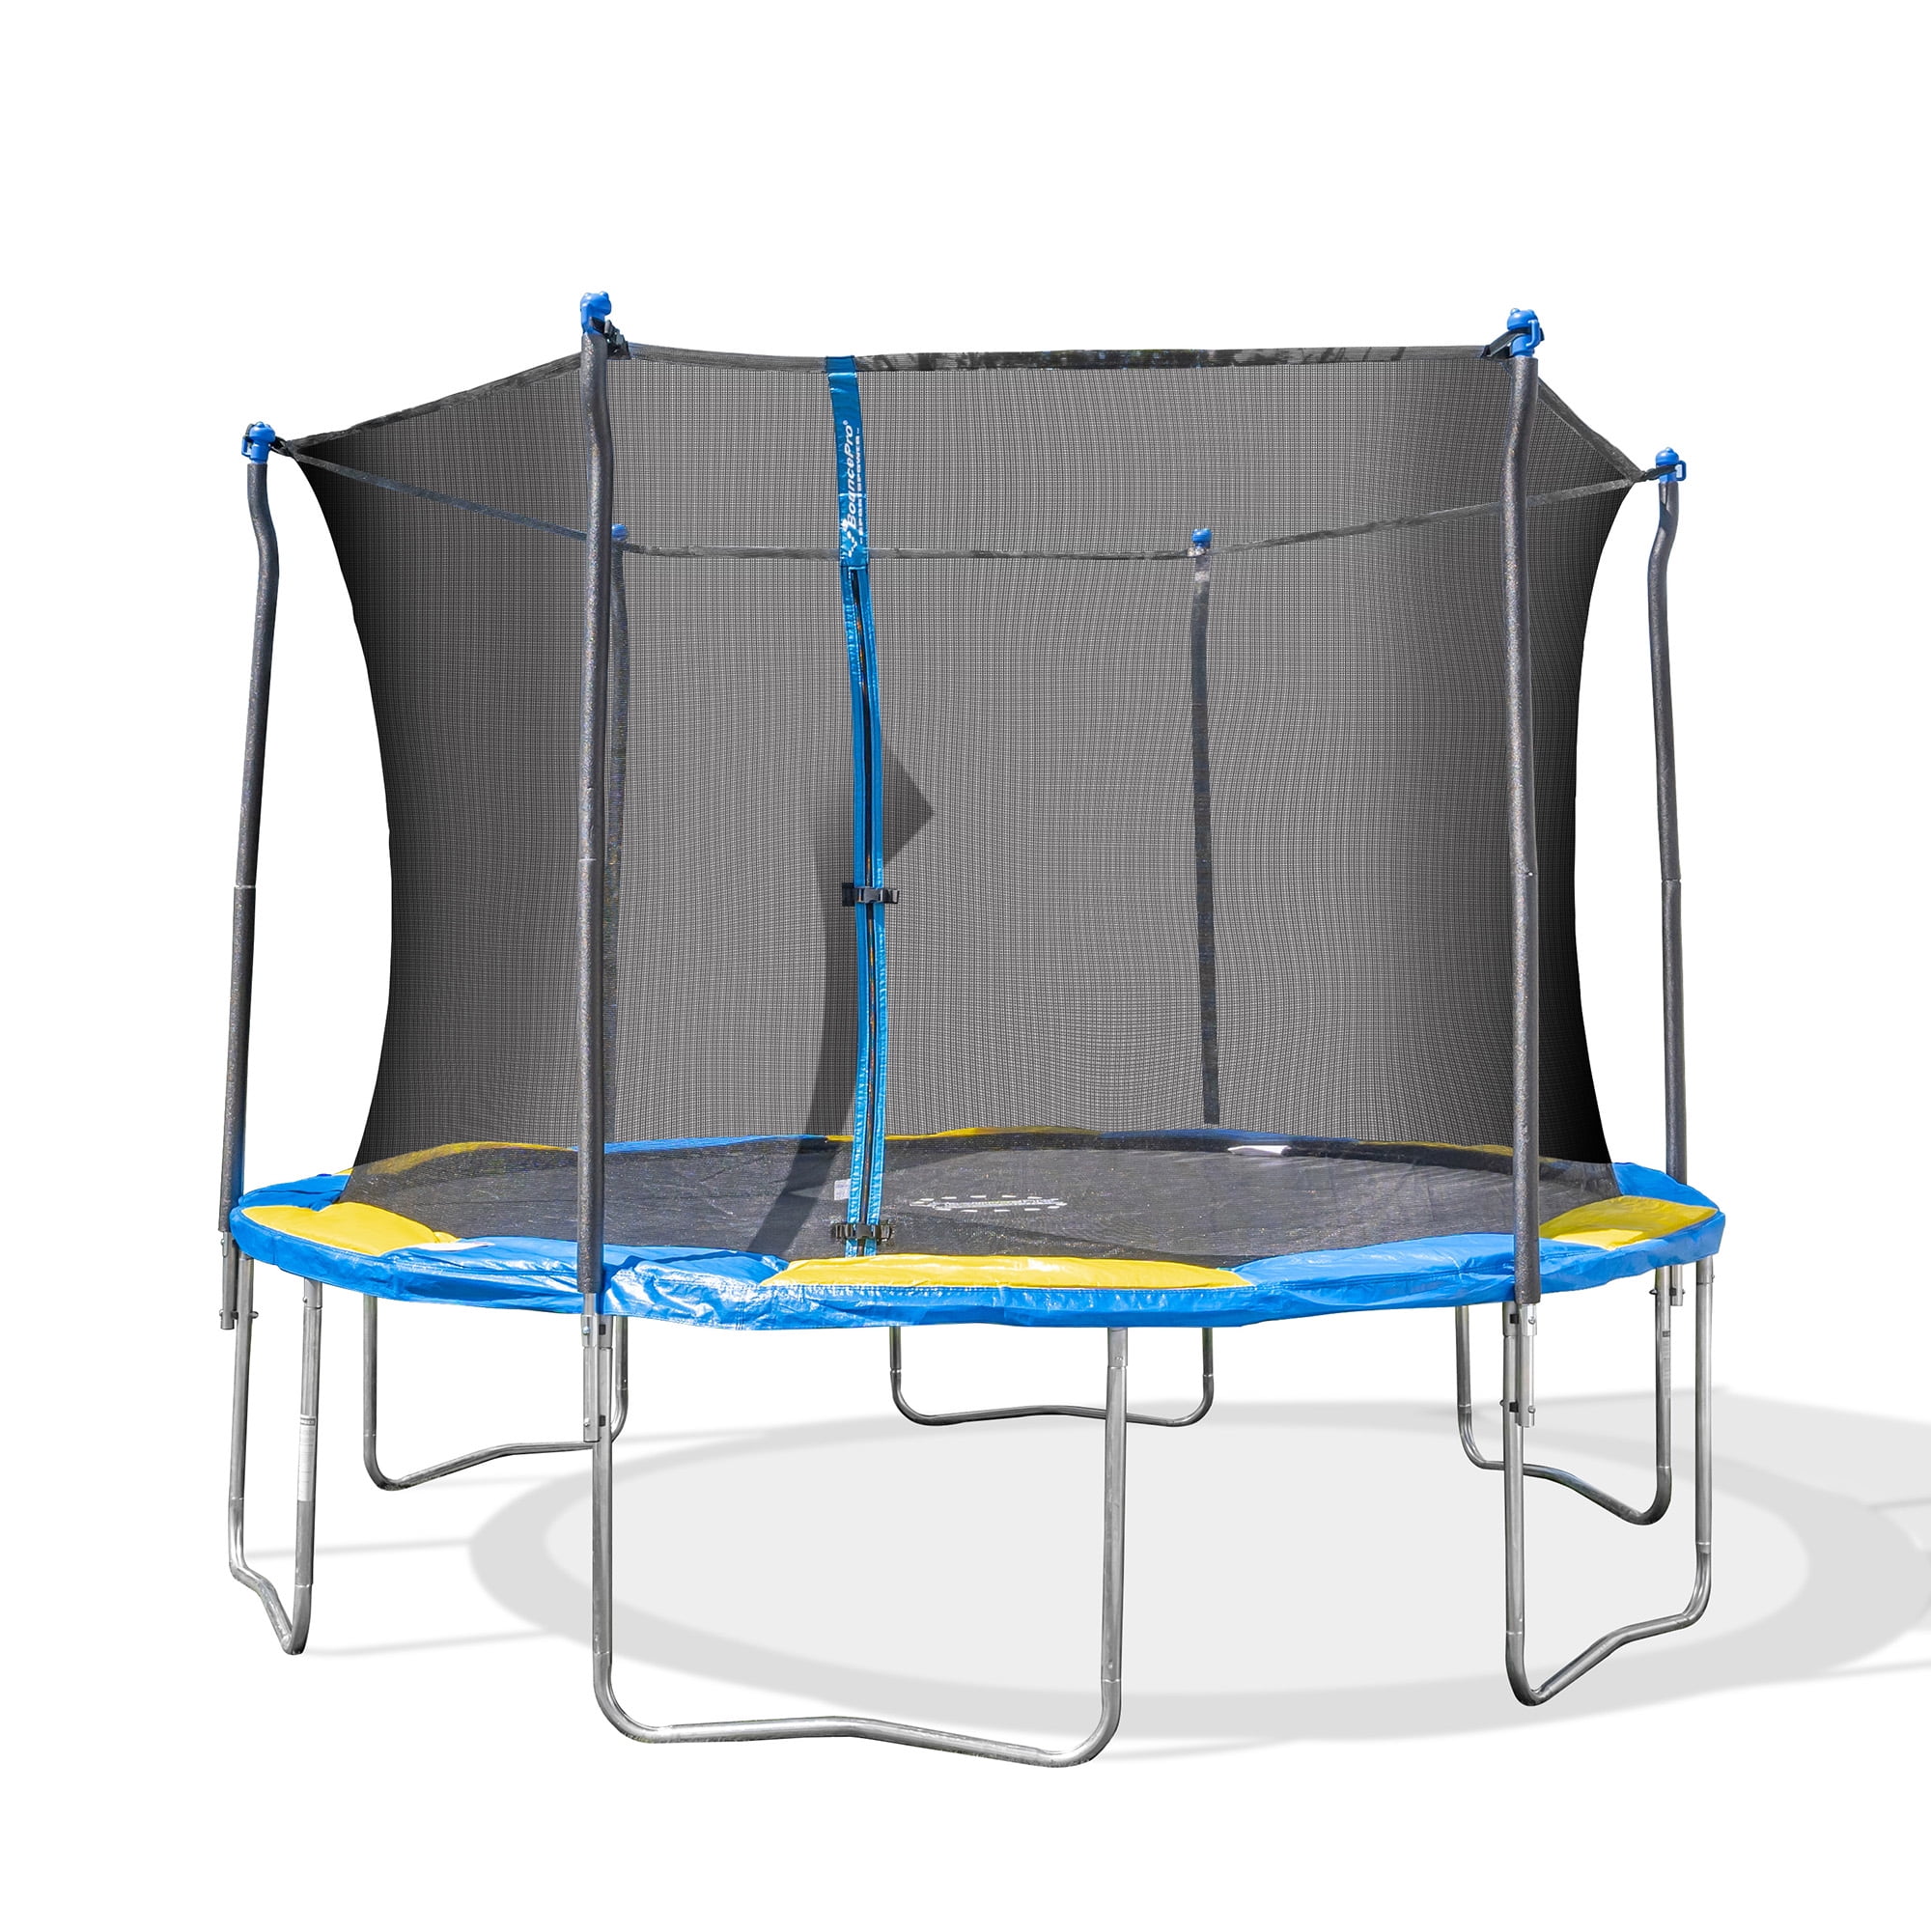 Bounce Pro 12' Trampoline with Combo, Blue/Yellow Walmart.com